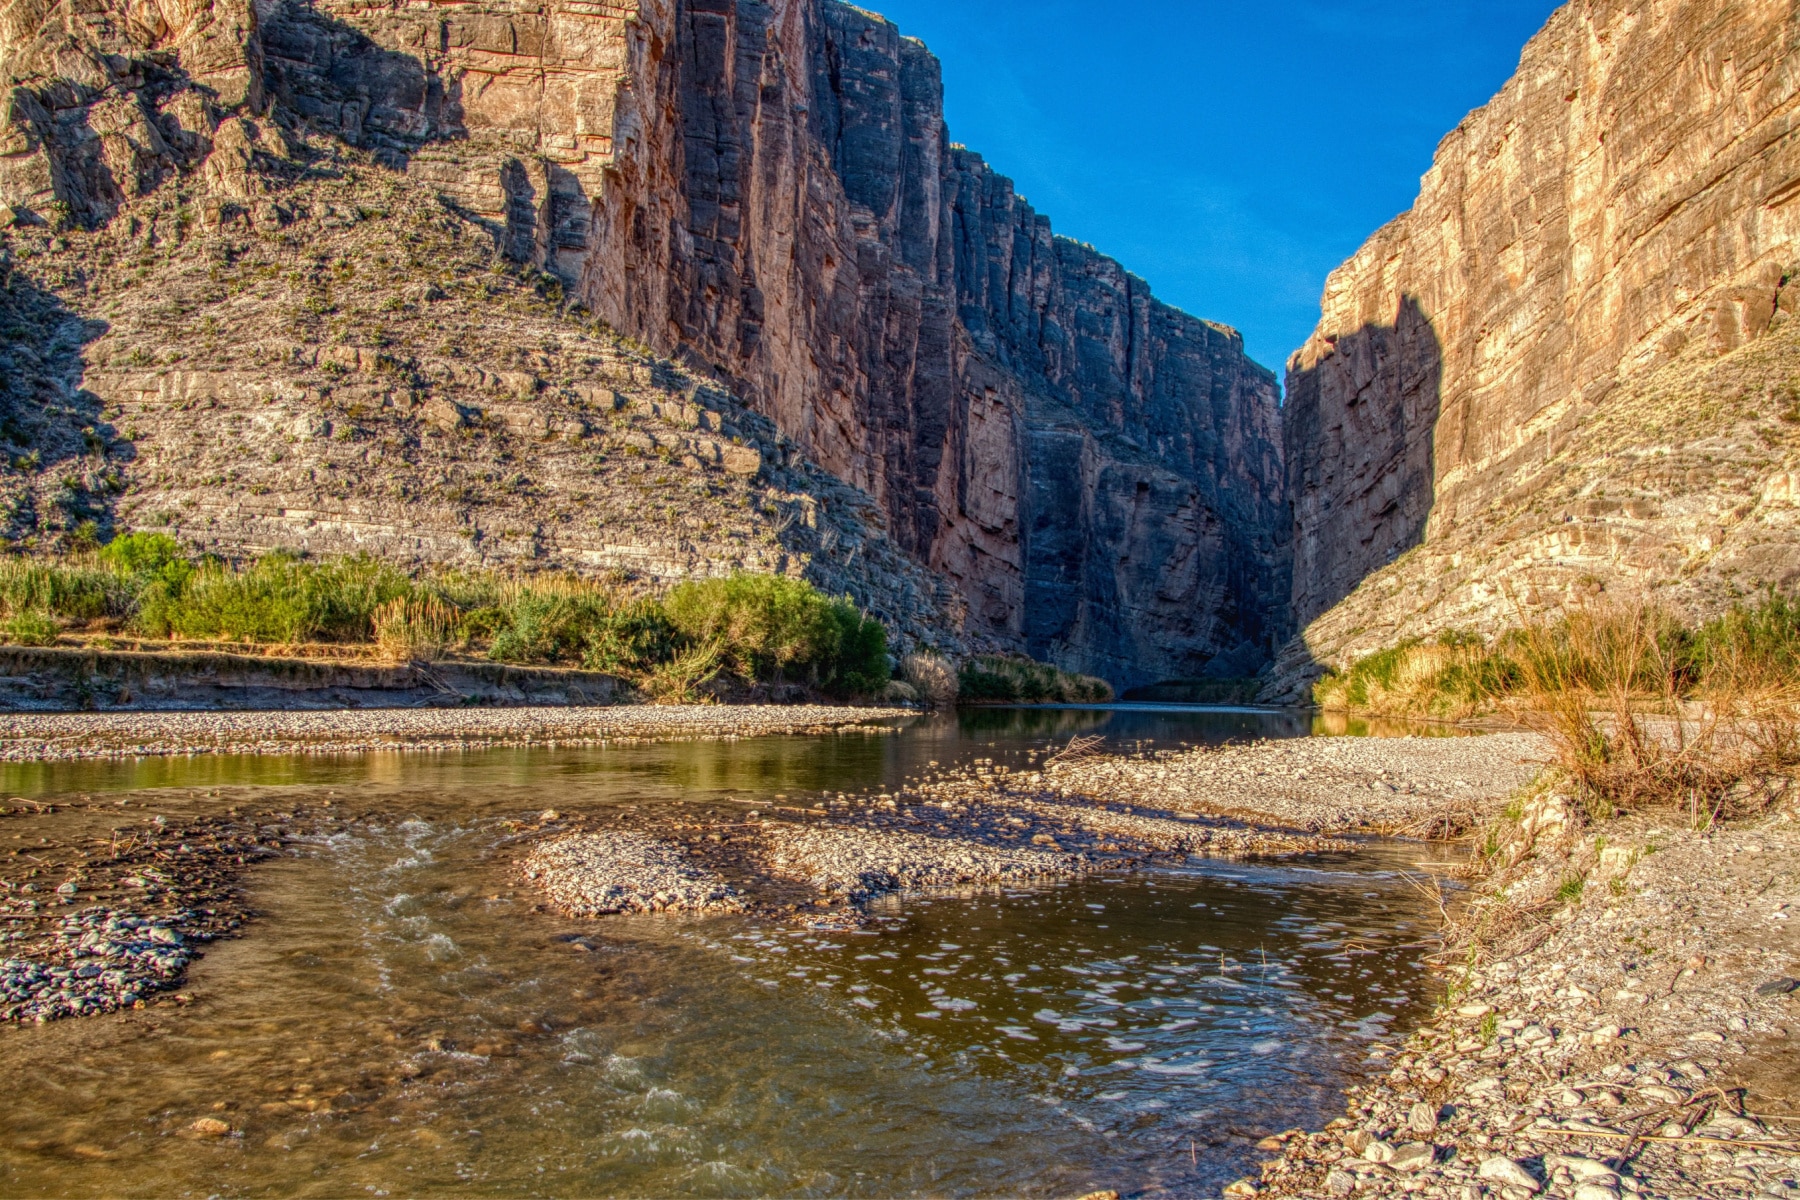 The Rio Grande runs between two vertical cliffs along the best hikes in Big Bend National Park. 